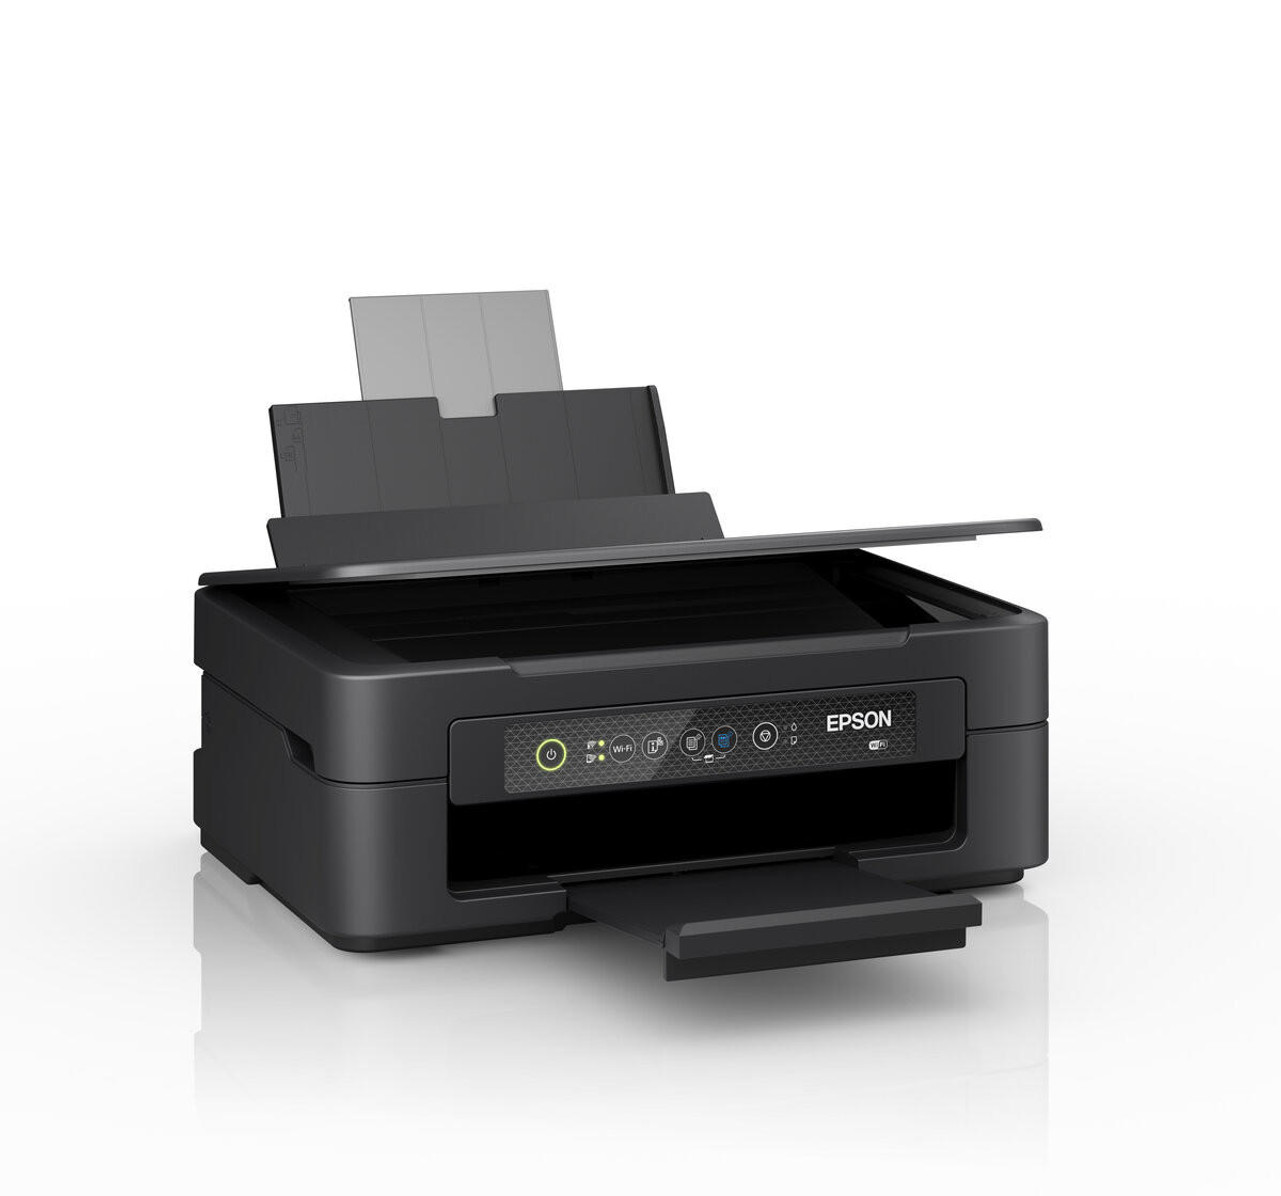 https://cdn11.bigcommerce.com/s-2e9j1bvyip/images/stencil/1281x1281/products/7581/15556/epson-expression-home-xp-2200-a4-multifunction-inkjet-printer__65856.1695385937.jpg?c=1